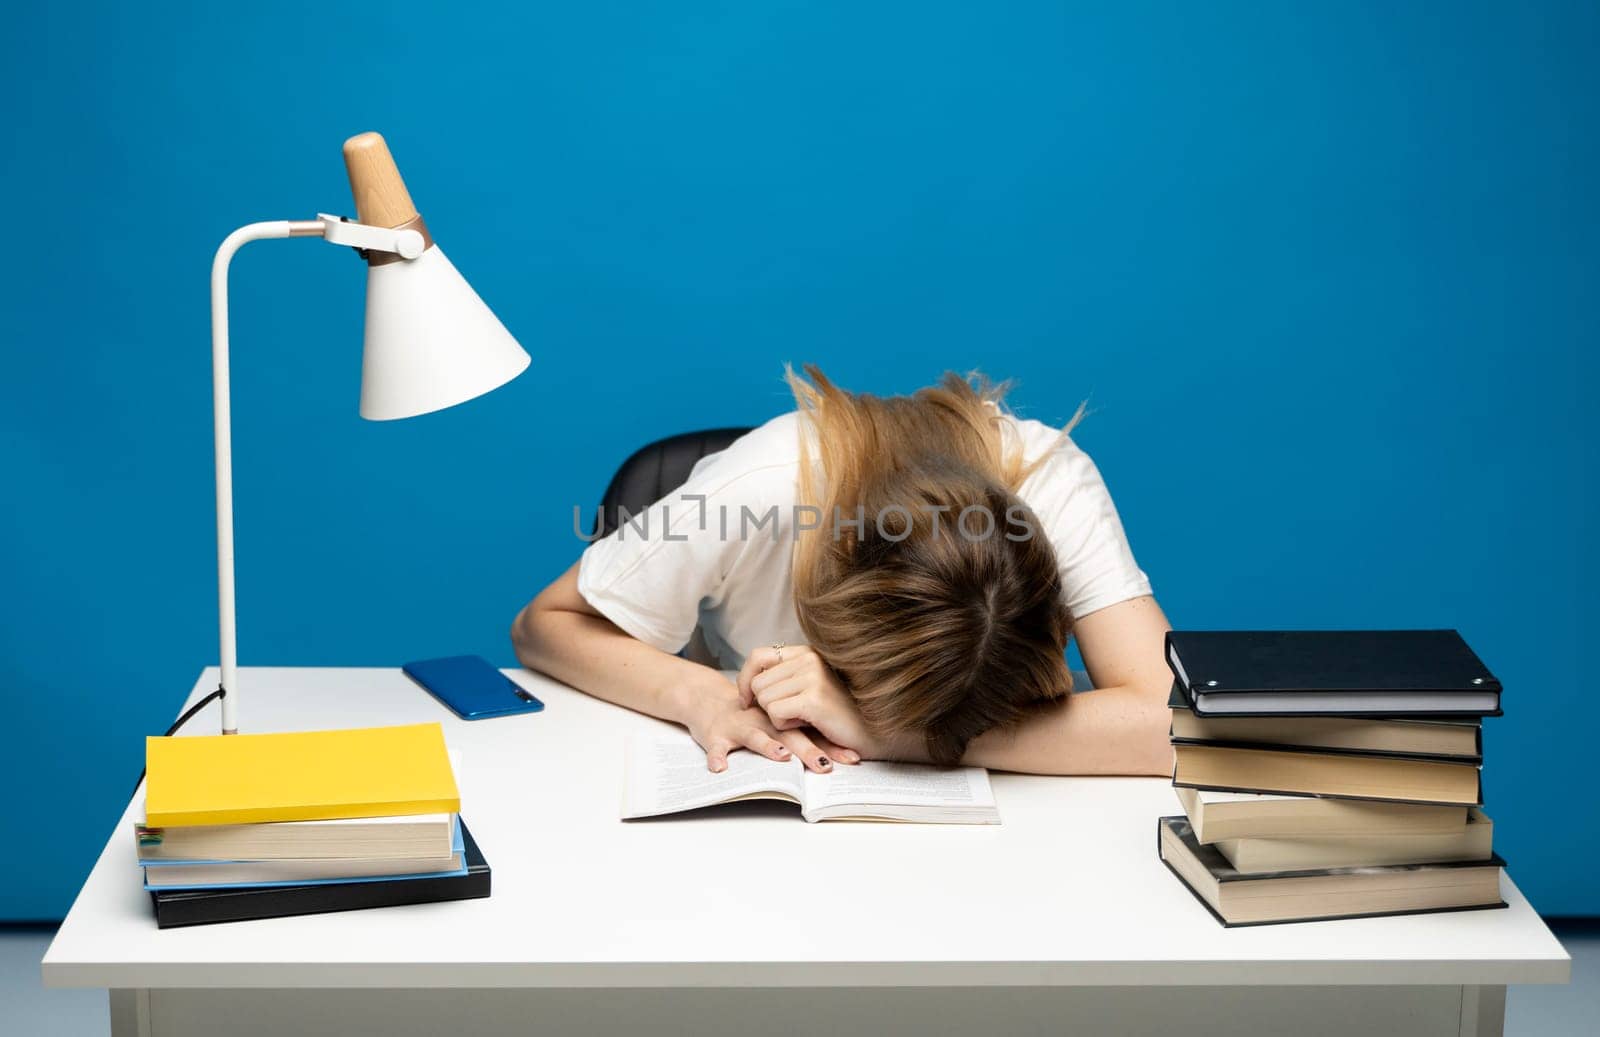 Tired student girl with glasses sleeping on the books in the library. Student studying hard exam and sleeping on books on a blue background